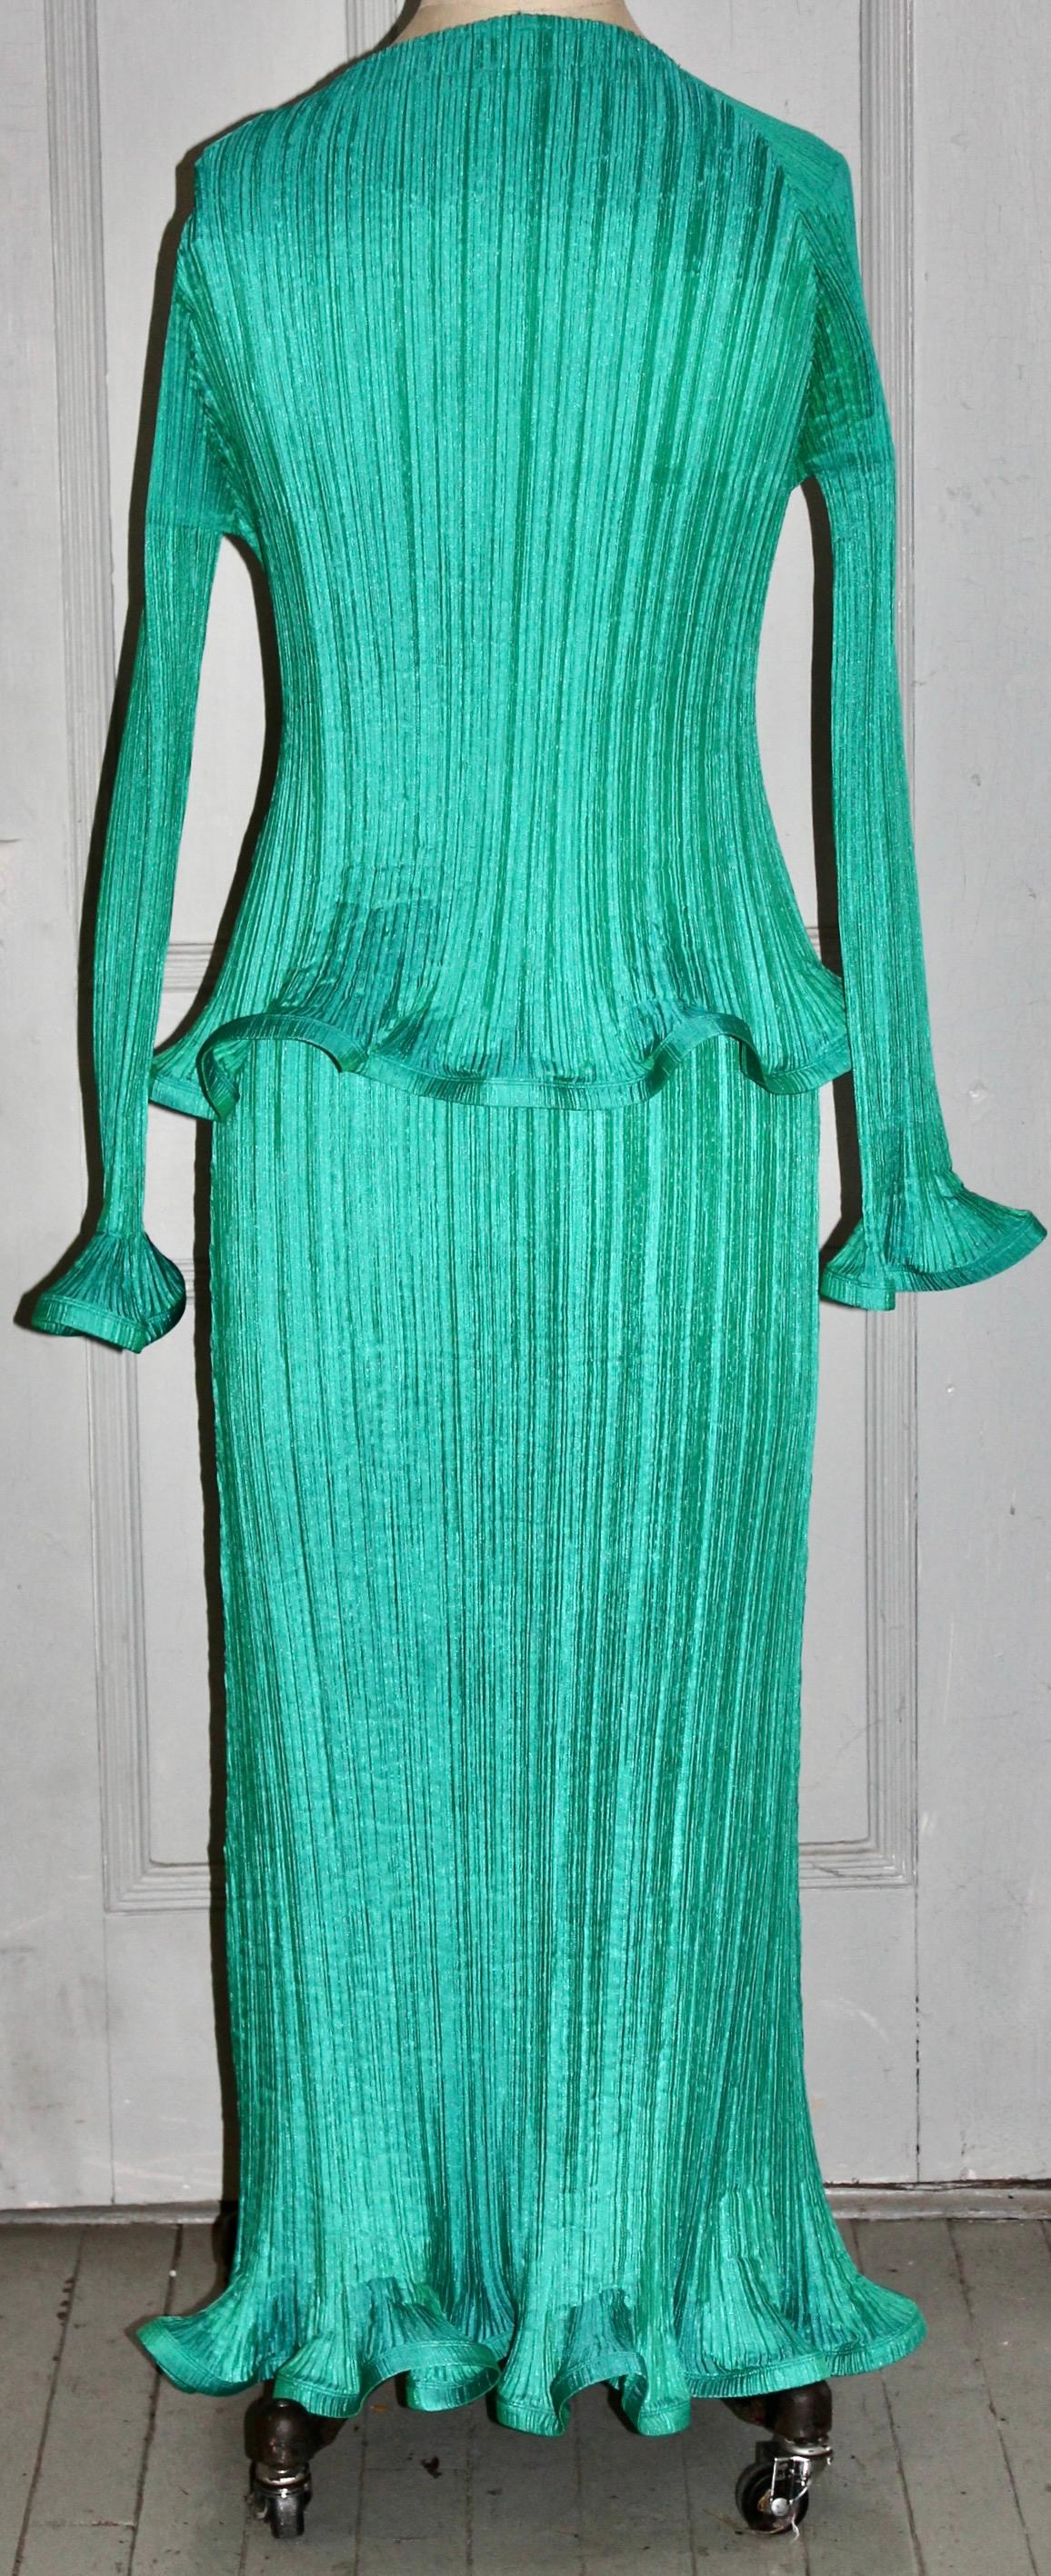 Issey Miyake 1990's Pleated Sculptural Dress and Overtop In Excellent Condition For Sale In Sharon, CT